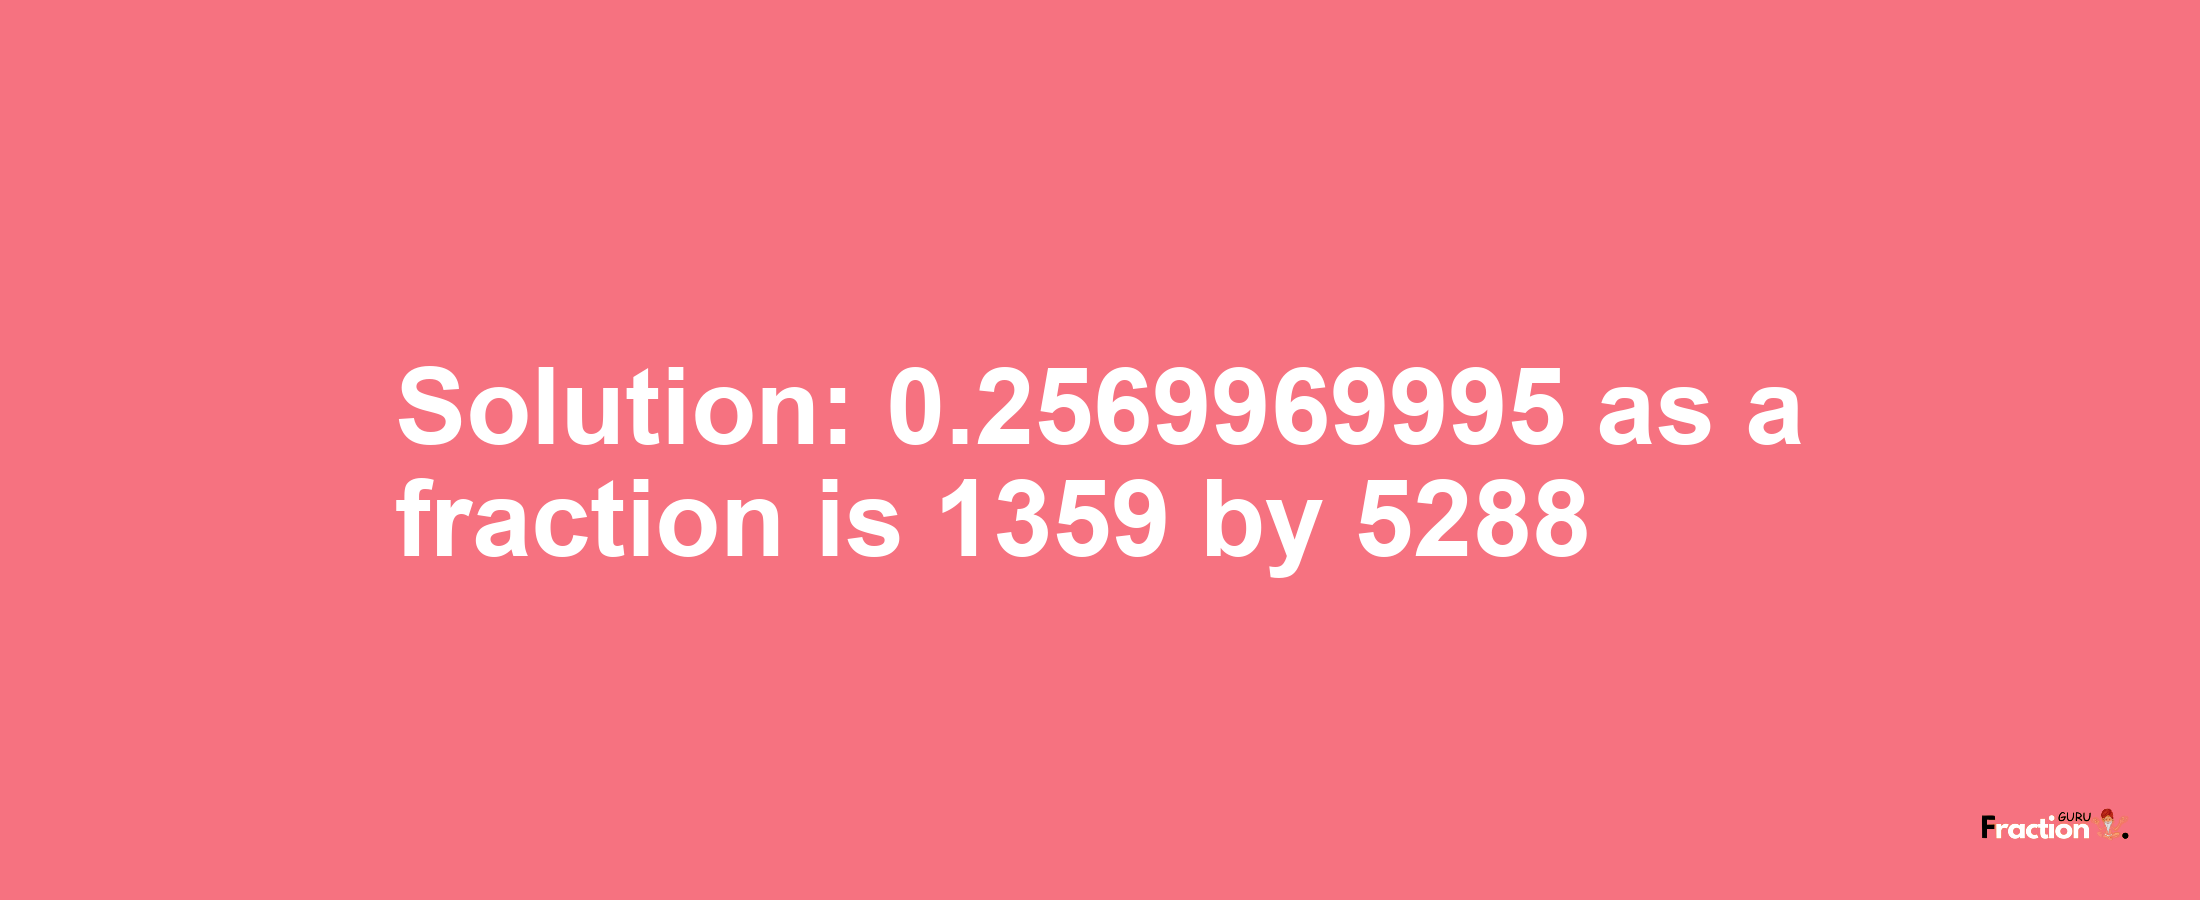 Solution:0.2569969995 as a fraction is 1359/5288